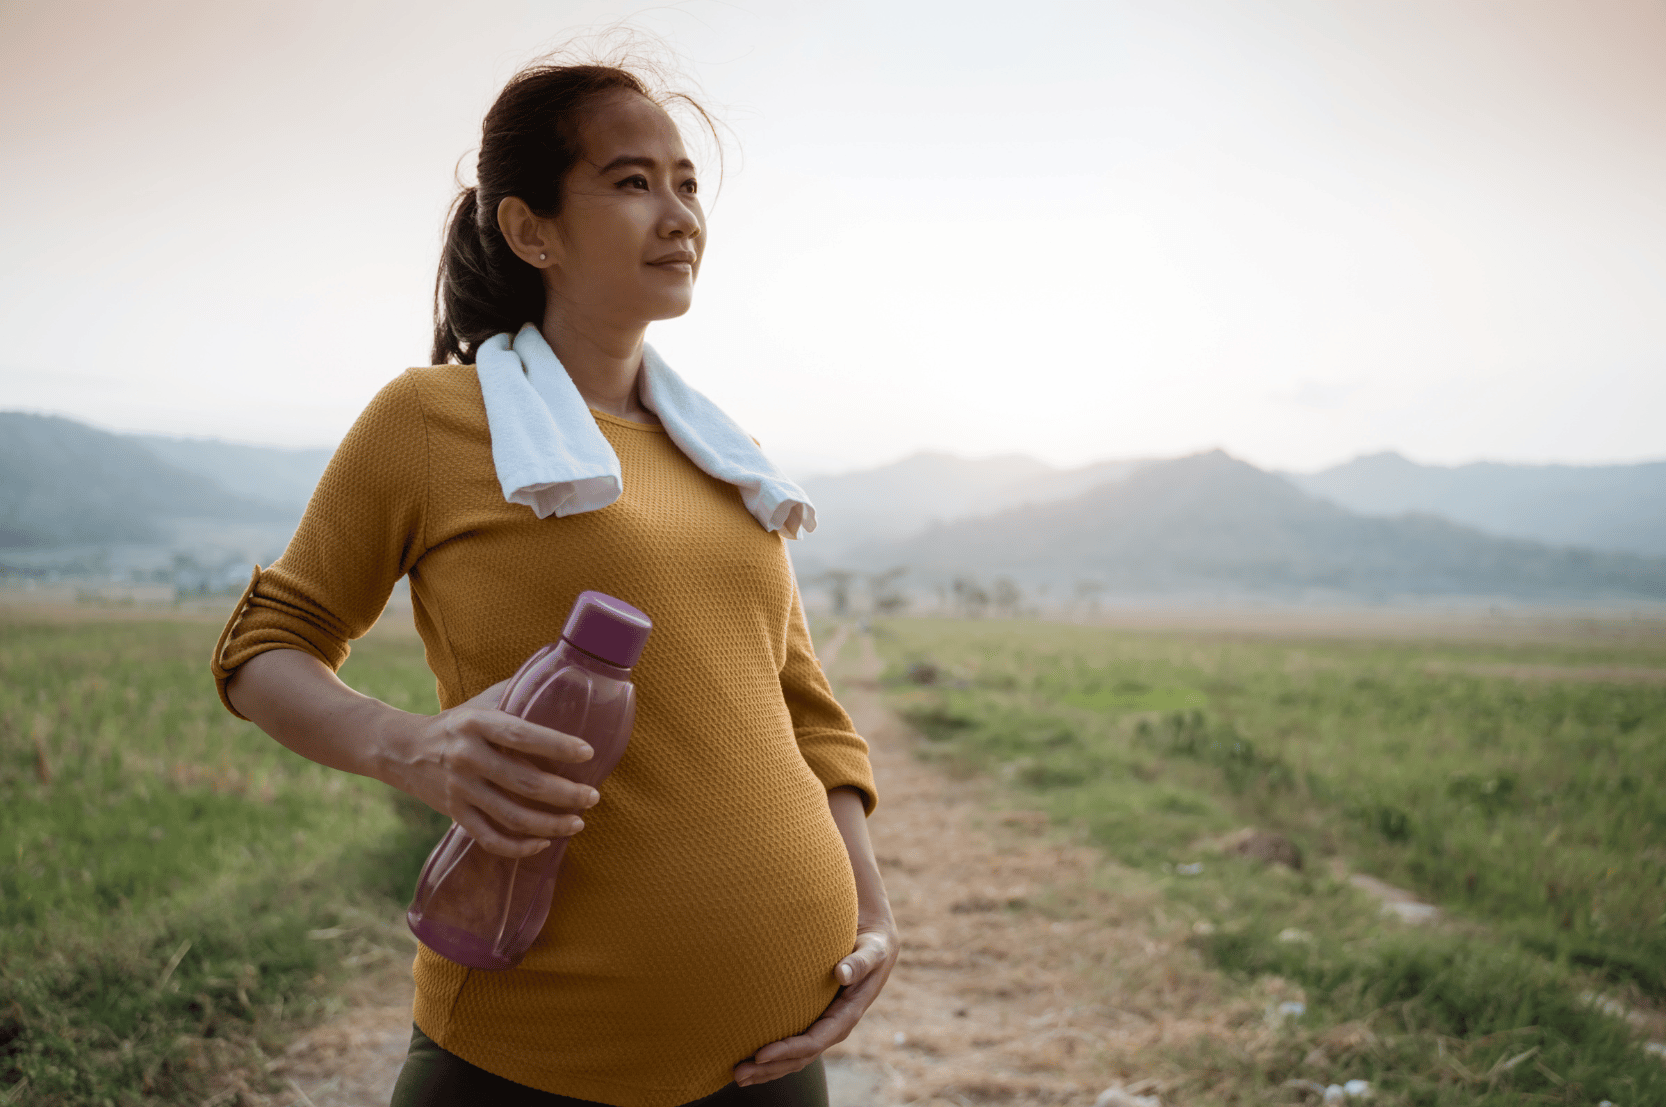 pregnant woman on a hike in the hills